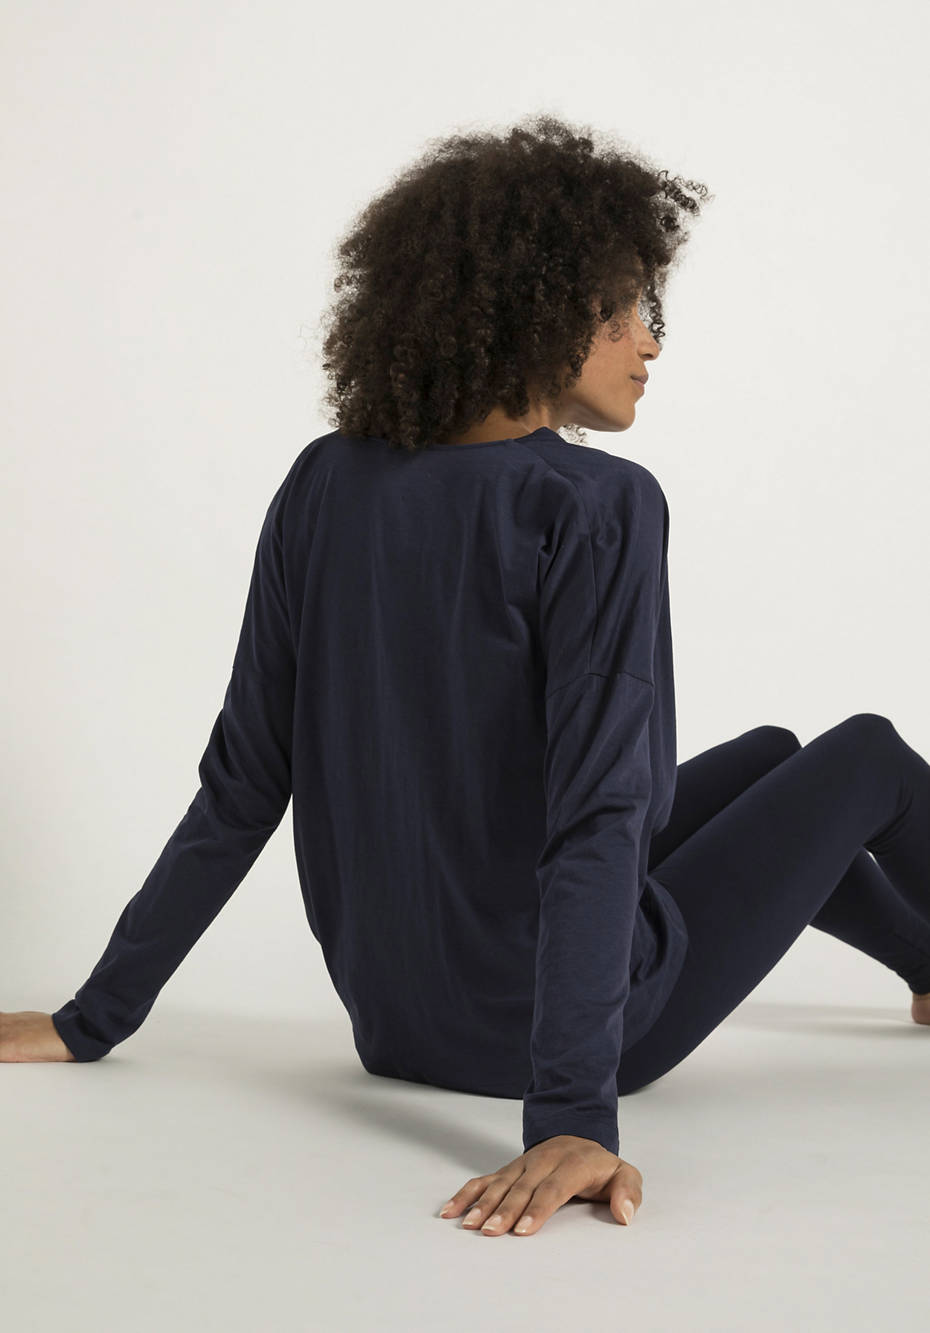 Yoga shirt made from pure organic cotton